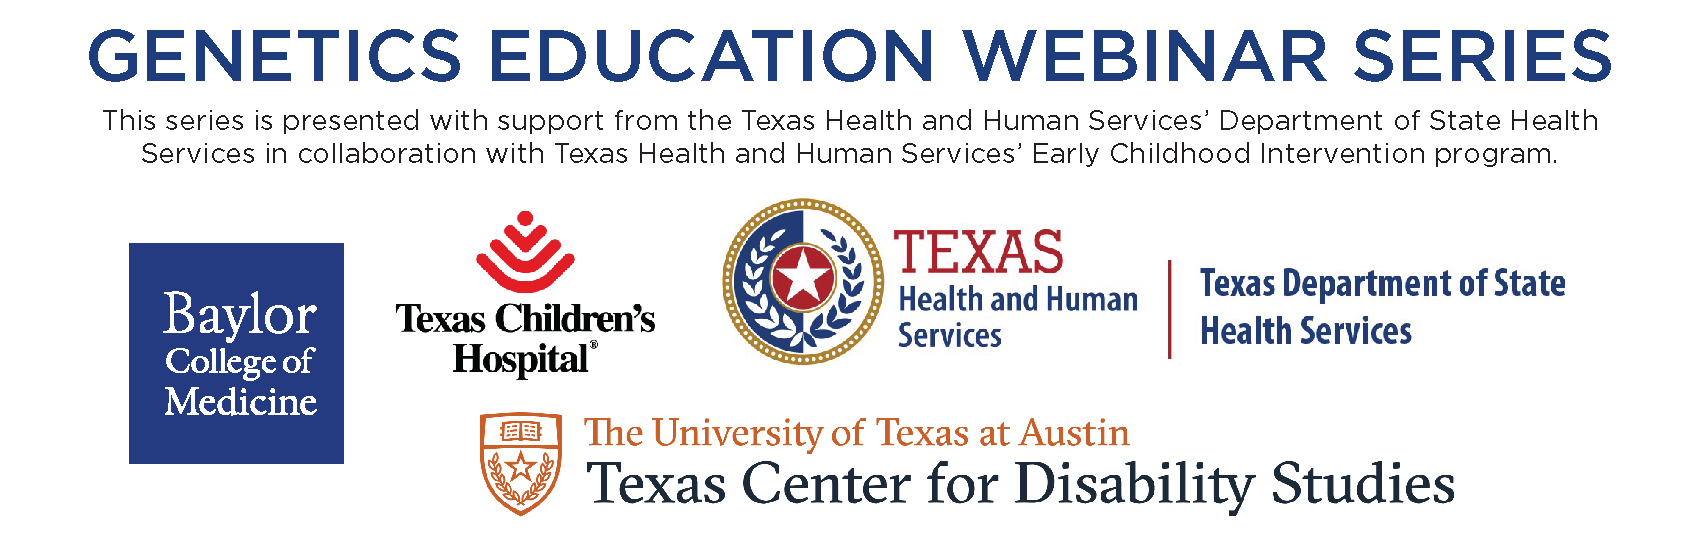 Genetics Webinar Series Banner. It reads: This series is presented with support from the Texas Health and Human Services’ Department of State Health Services in collaboration with Texas Health and Human Services’ Early Childhood Intervention program.